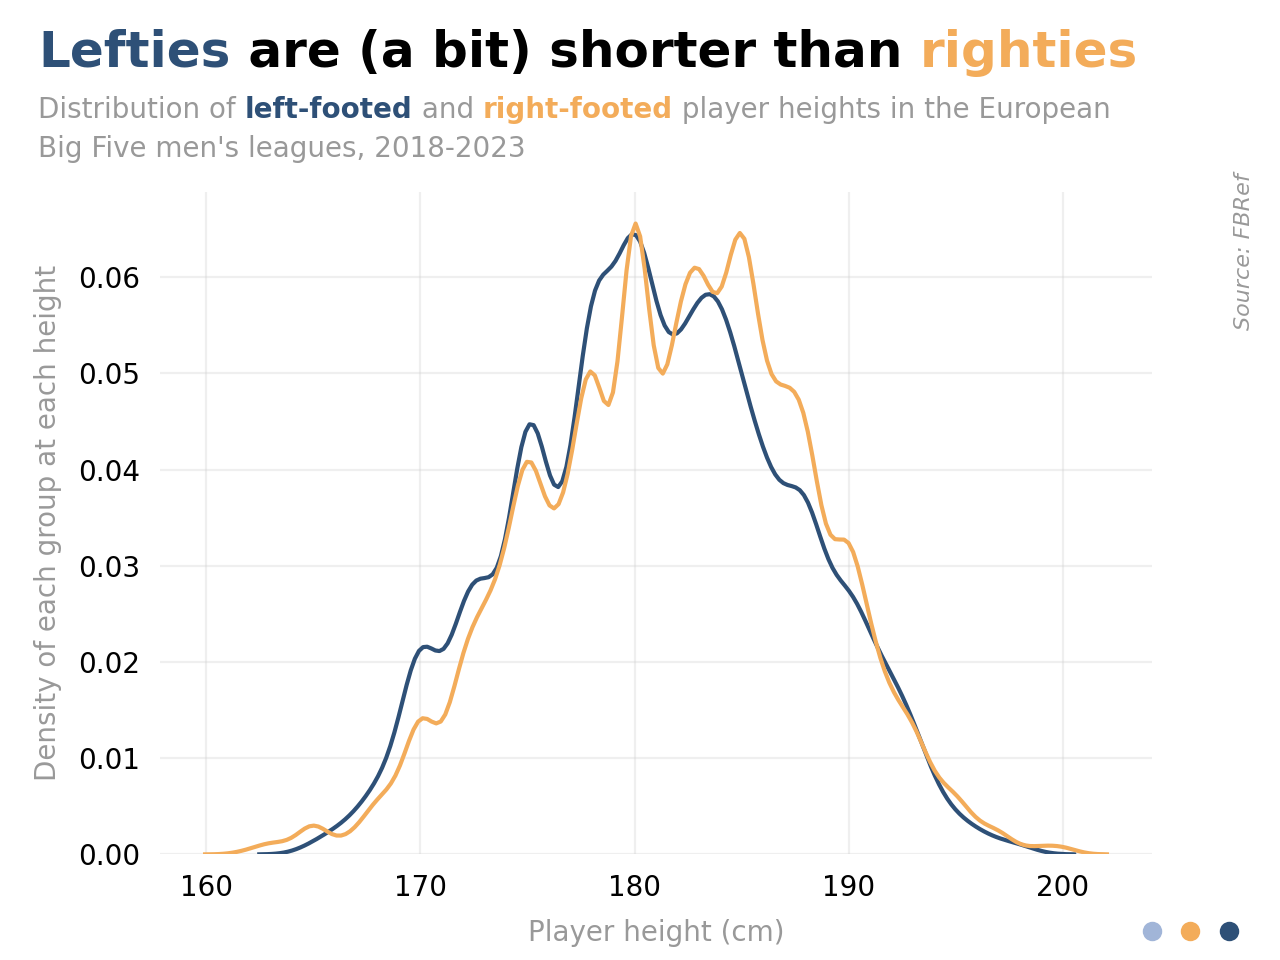 Distribution plot of left- and right-footed player heights in centimetres - both are normally distributed, with a slight shorter skew for lefties and slight taller skew for righties, in comparison to each other